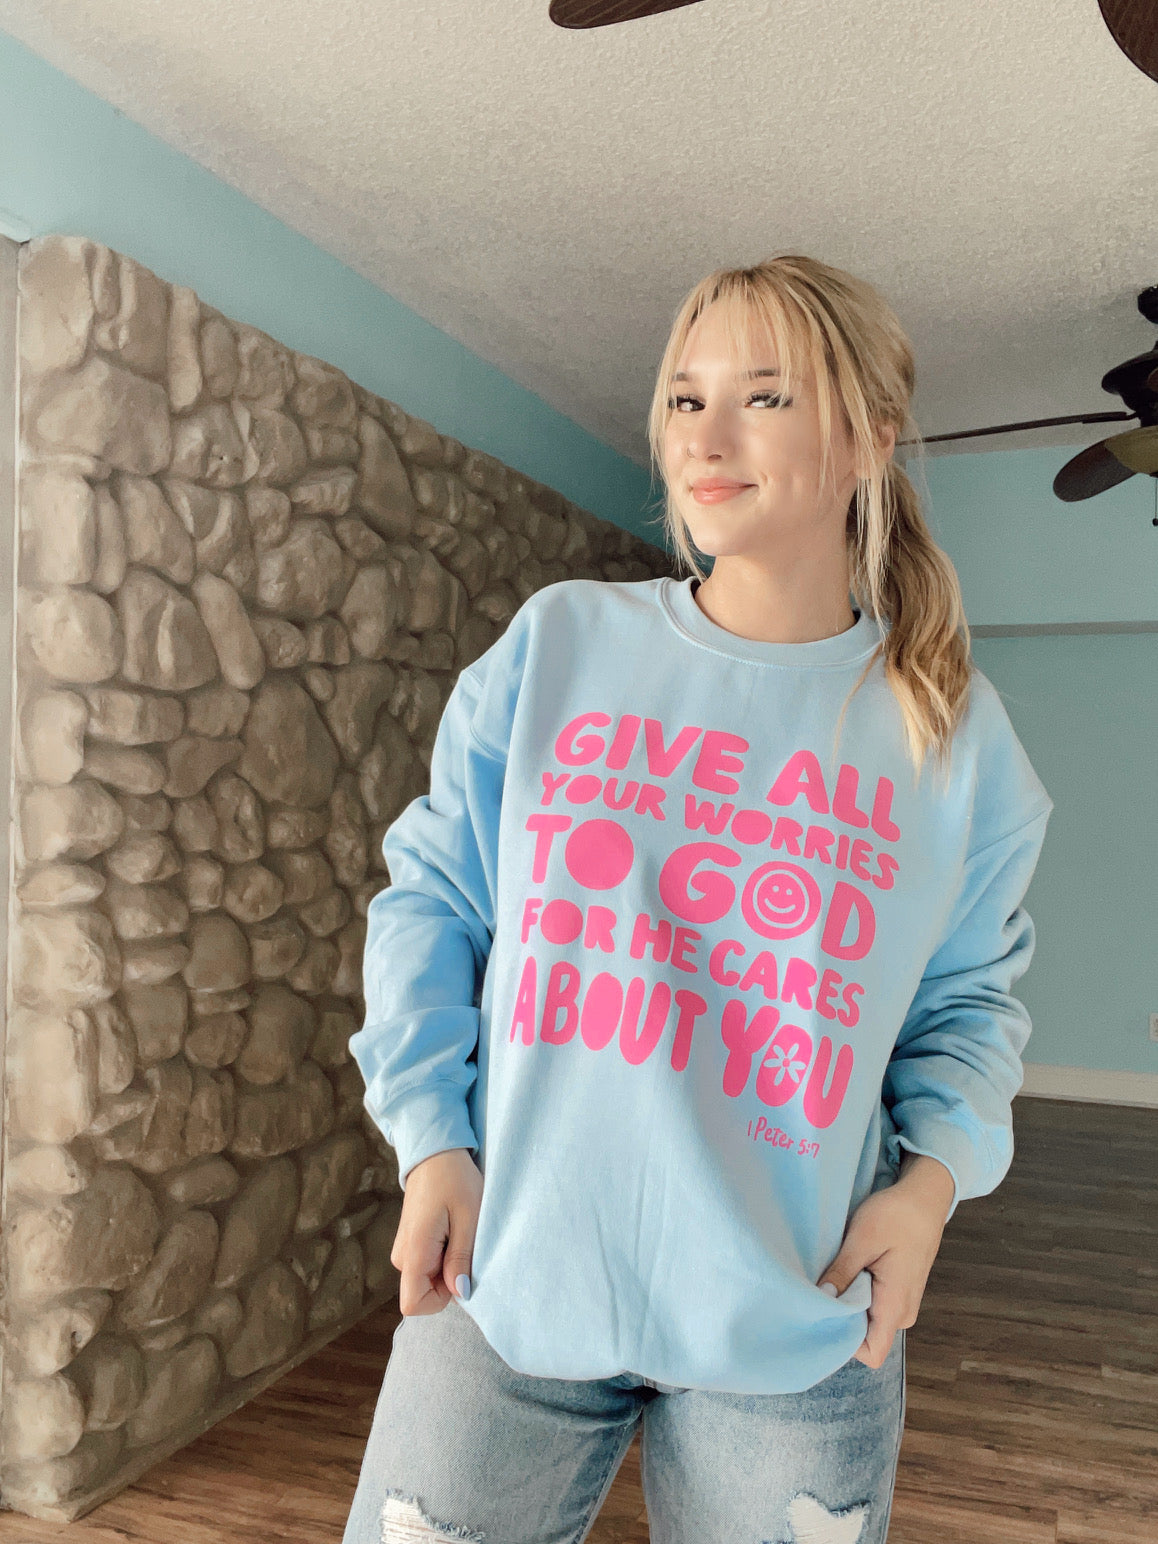 Give all your worries to God | T-shirt or Sweatshirt